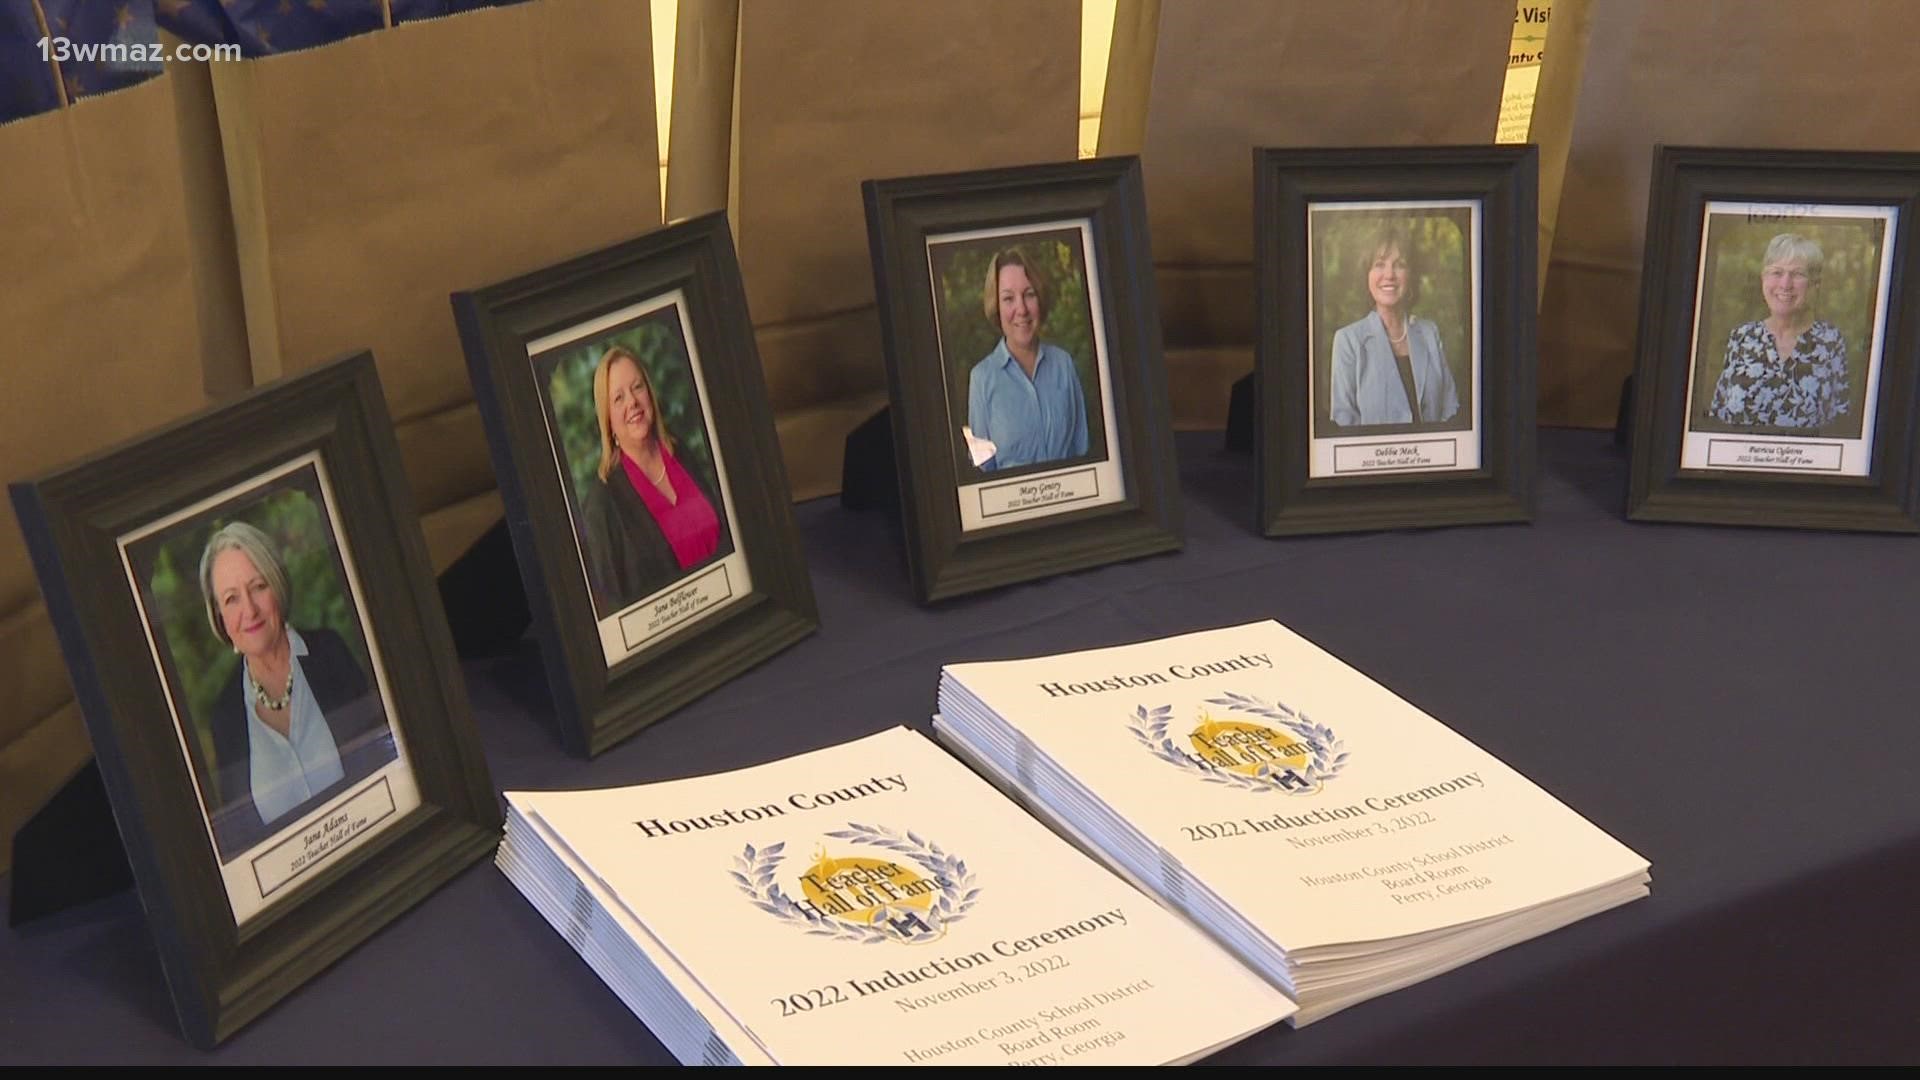 The Houston County Teacher Hall of Fame recognizes extraordinary classroom teachers who affected the lives of their students.